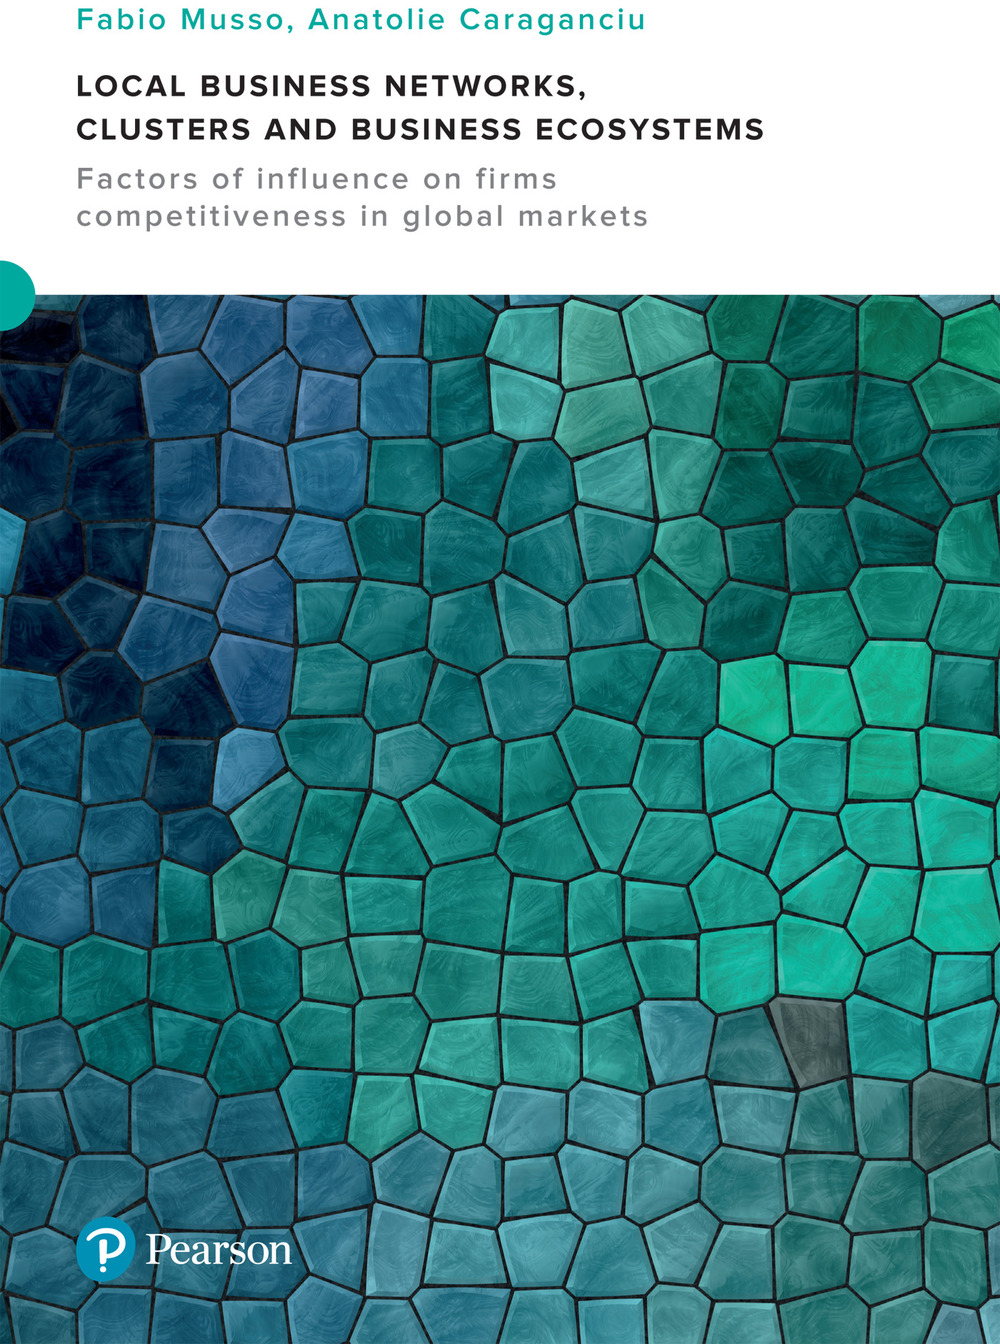 Local business networks, clusters and business ecosystem. Factors of influence on firms competitiveness in global markets